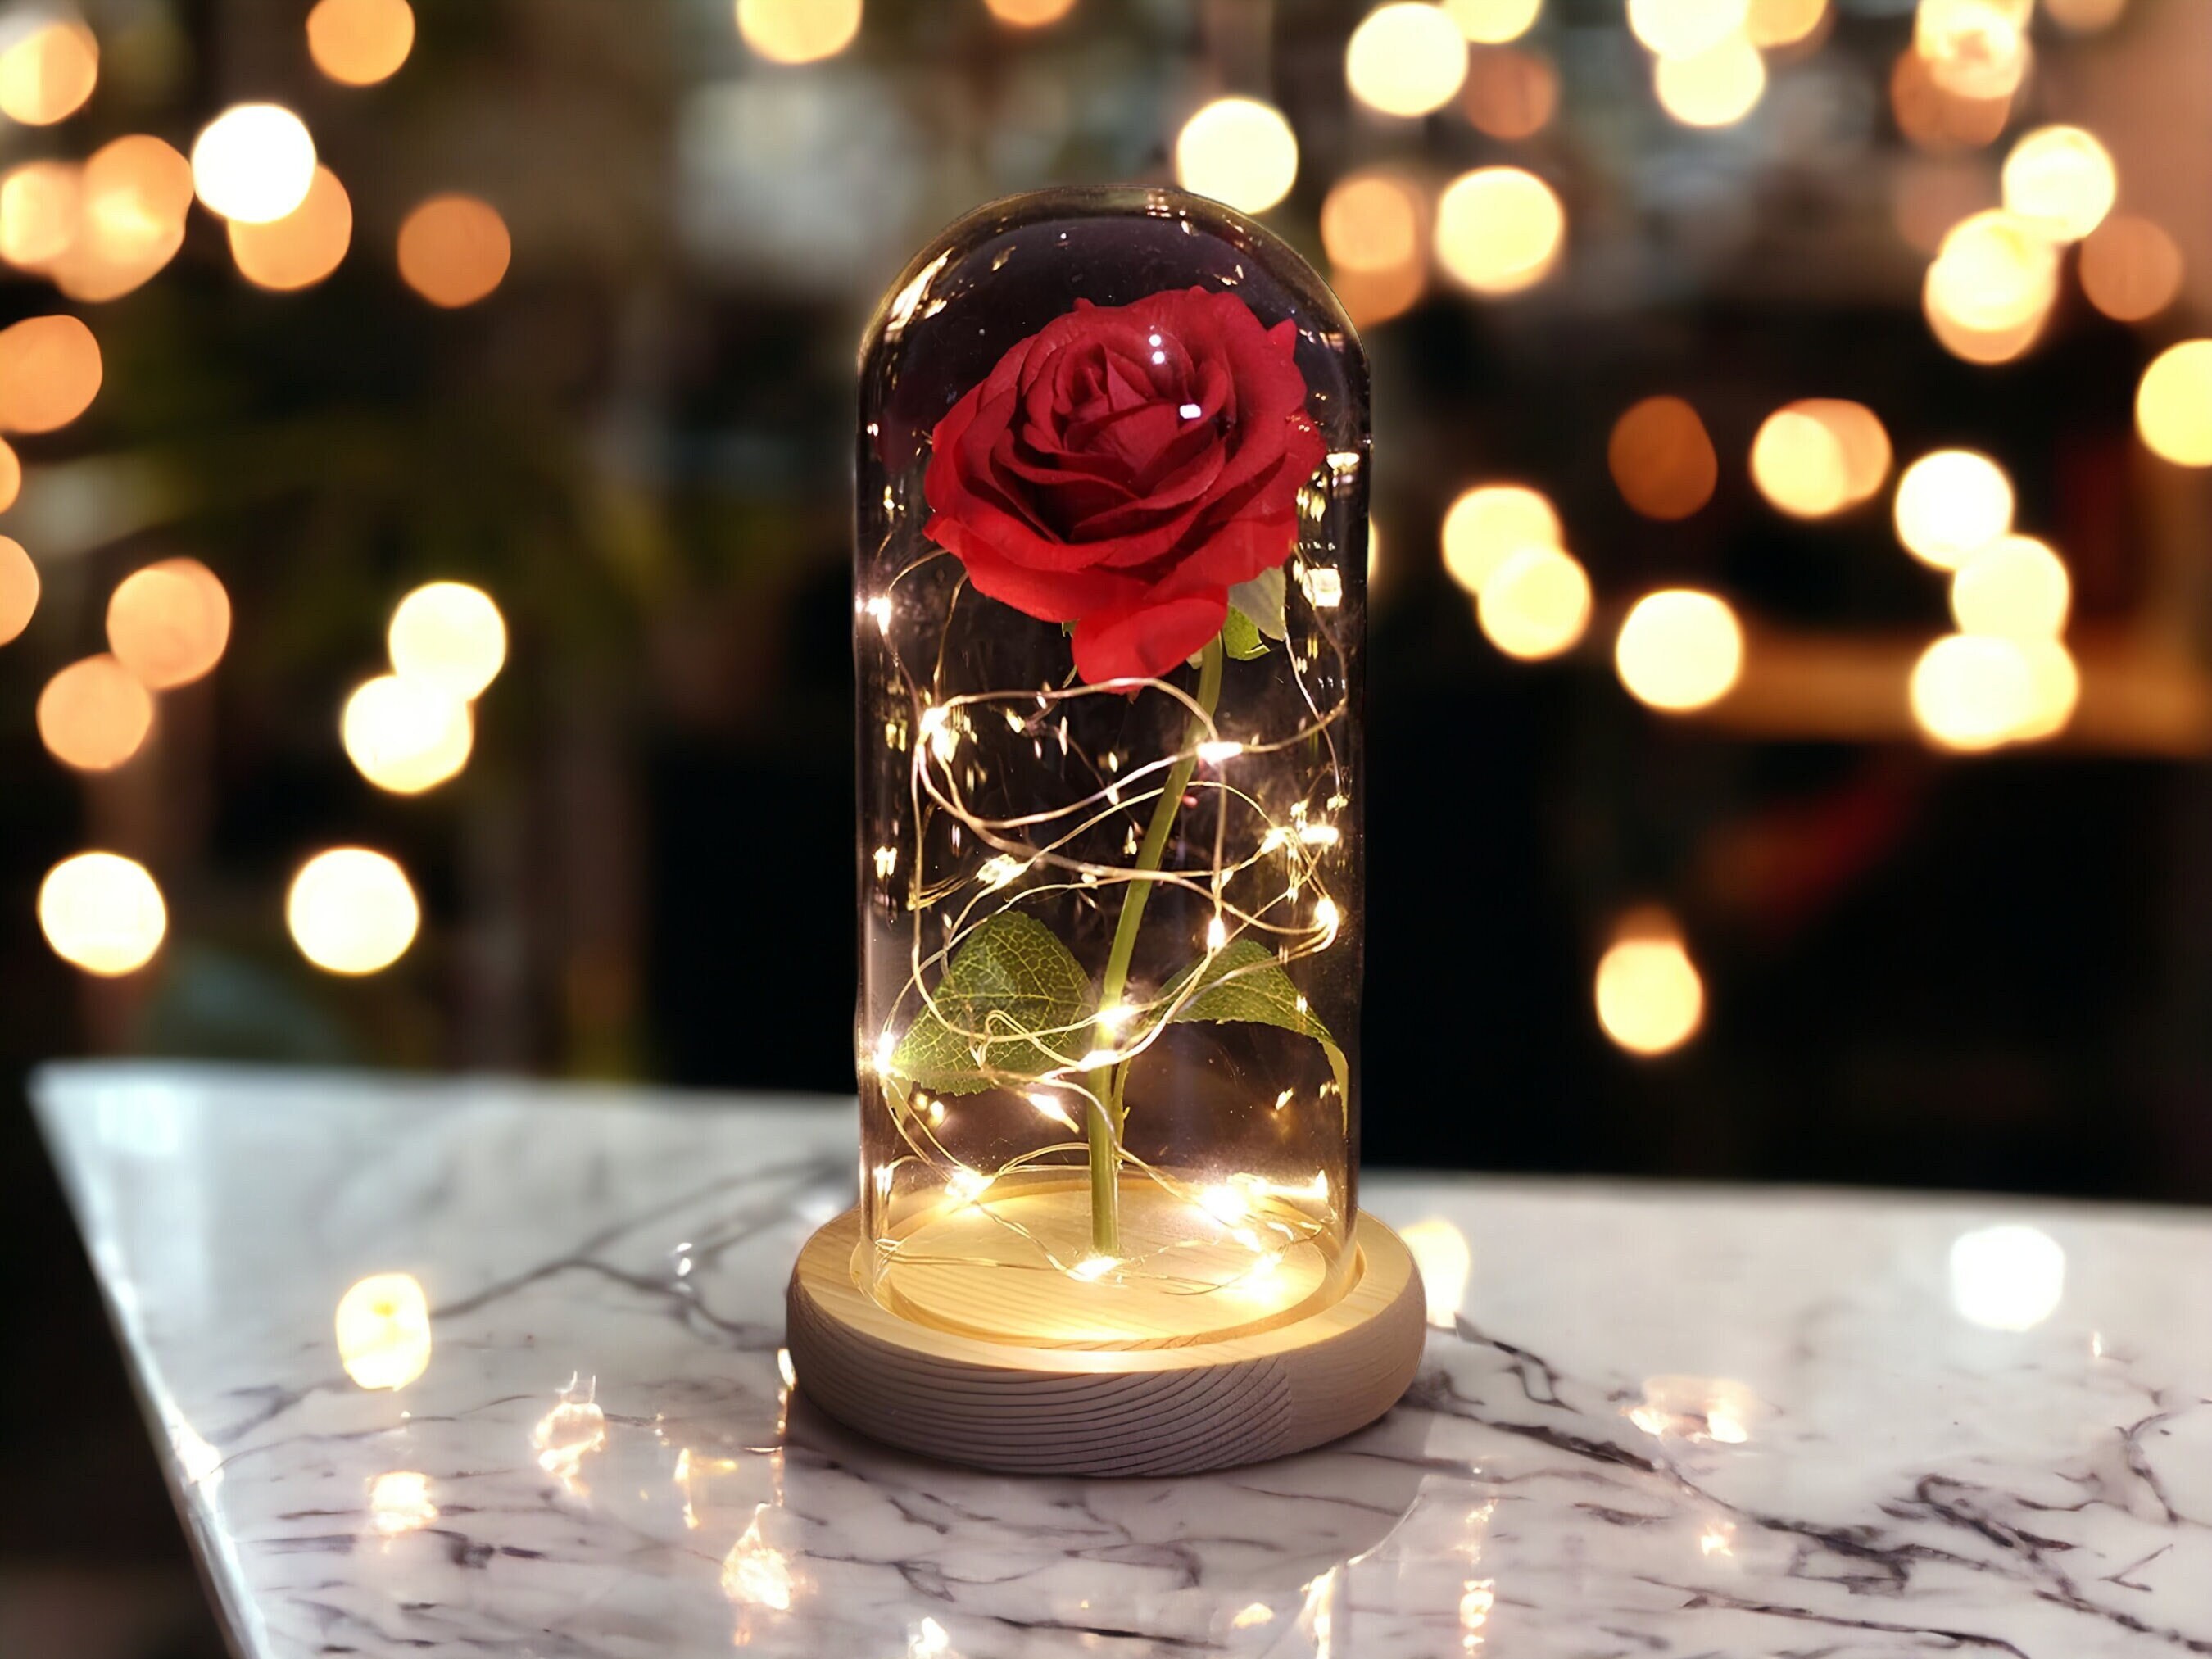 Fairnull Eternal Rose in Glass Dome Romantic Aesthetic Artificial Eternal  Rose Flower in Glass Dome Gift Mother's Day Supplies